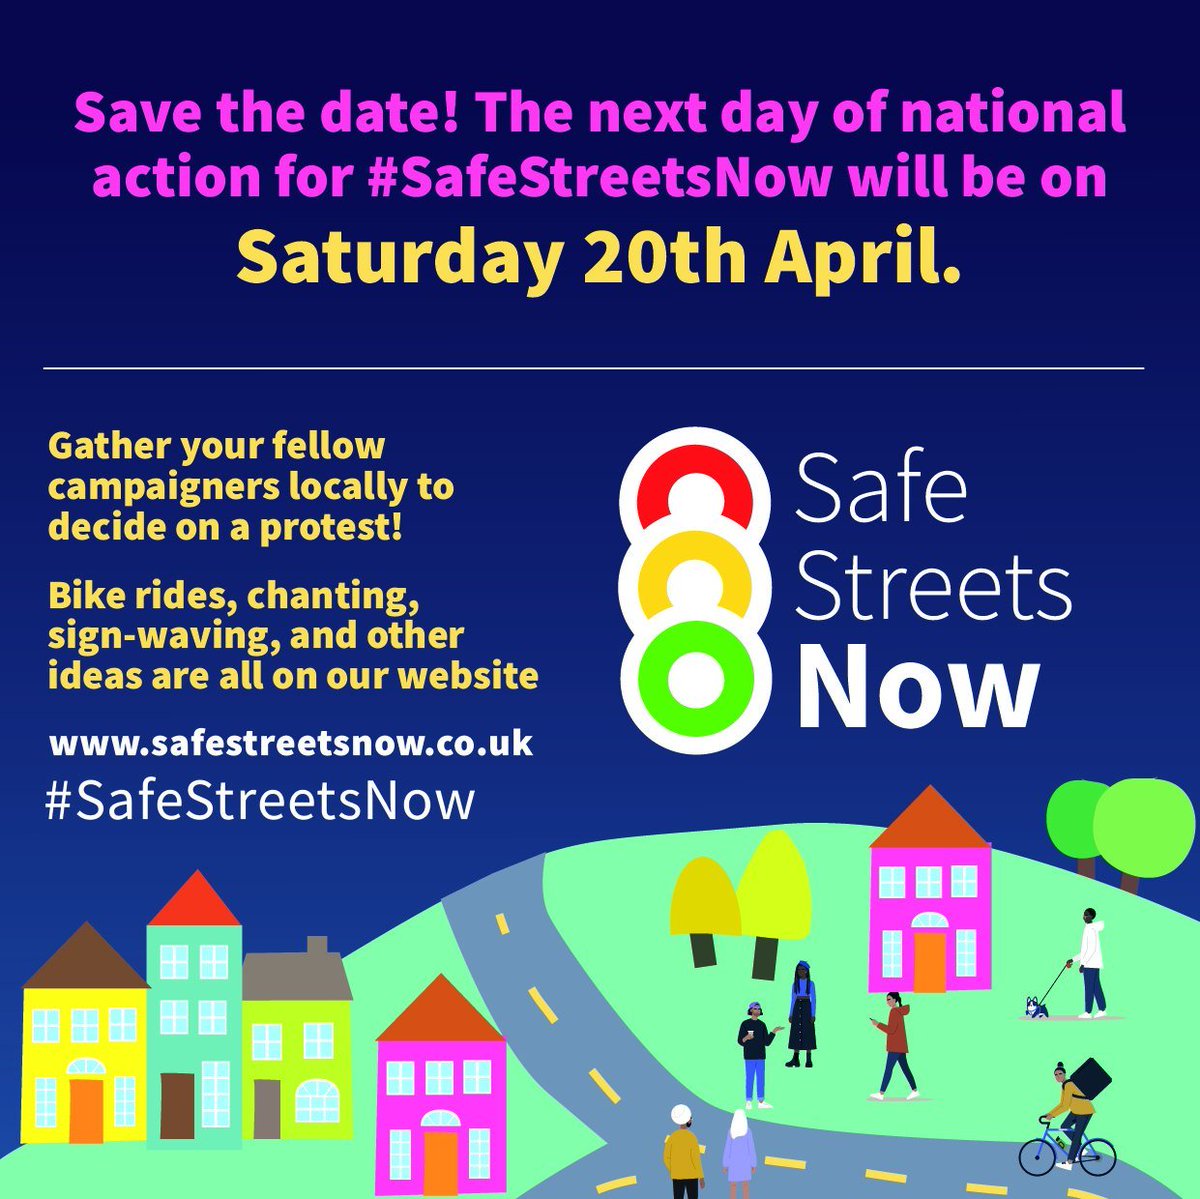 Last year we highlighted Goldington Rd's extreme speeding & school children at risk crossing to & from school. This year we highlight Ashburnham Road, by the station, location of several collisions. *Do join us there next Saturday, 2pm*. #SafeStreetsNow #RoadSafety #Bedford